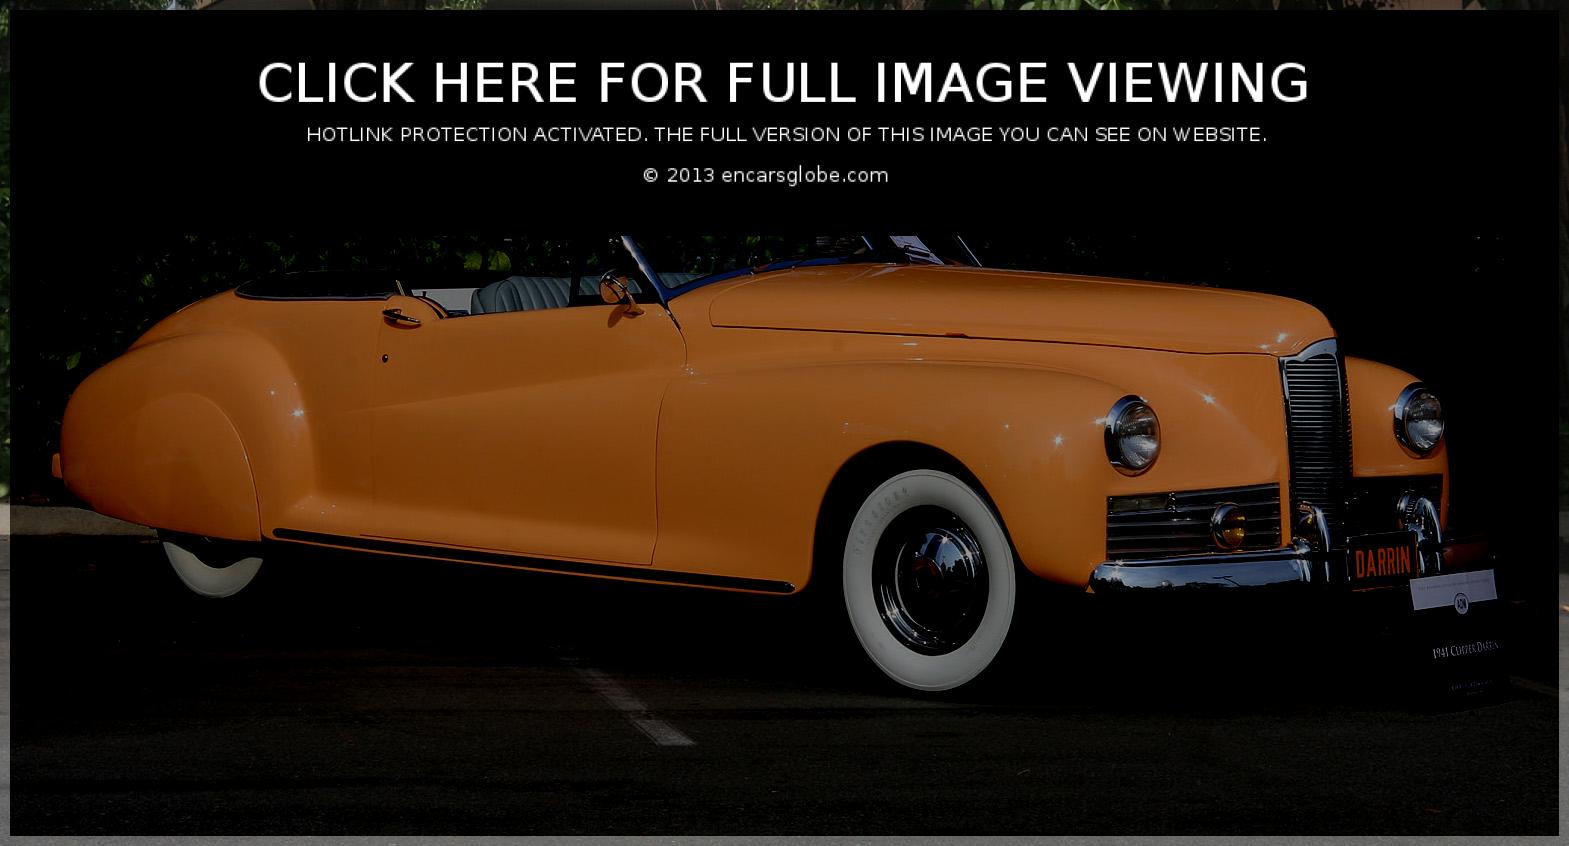 Packard 733 Convertible Coupe Photo Gallery: Photo #02 out of 8 ...